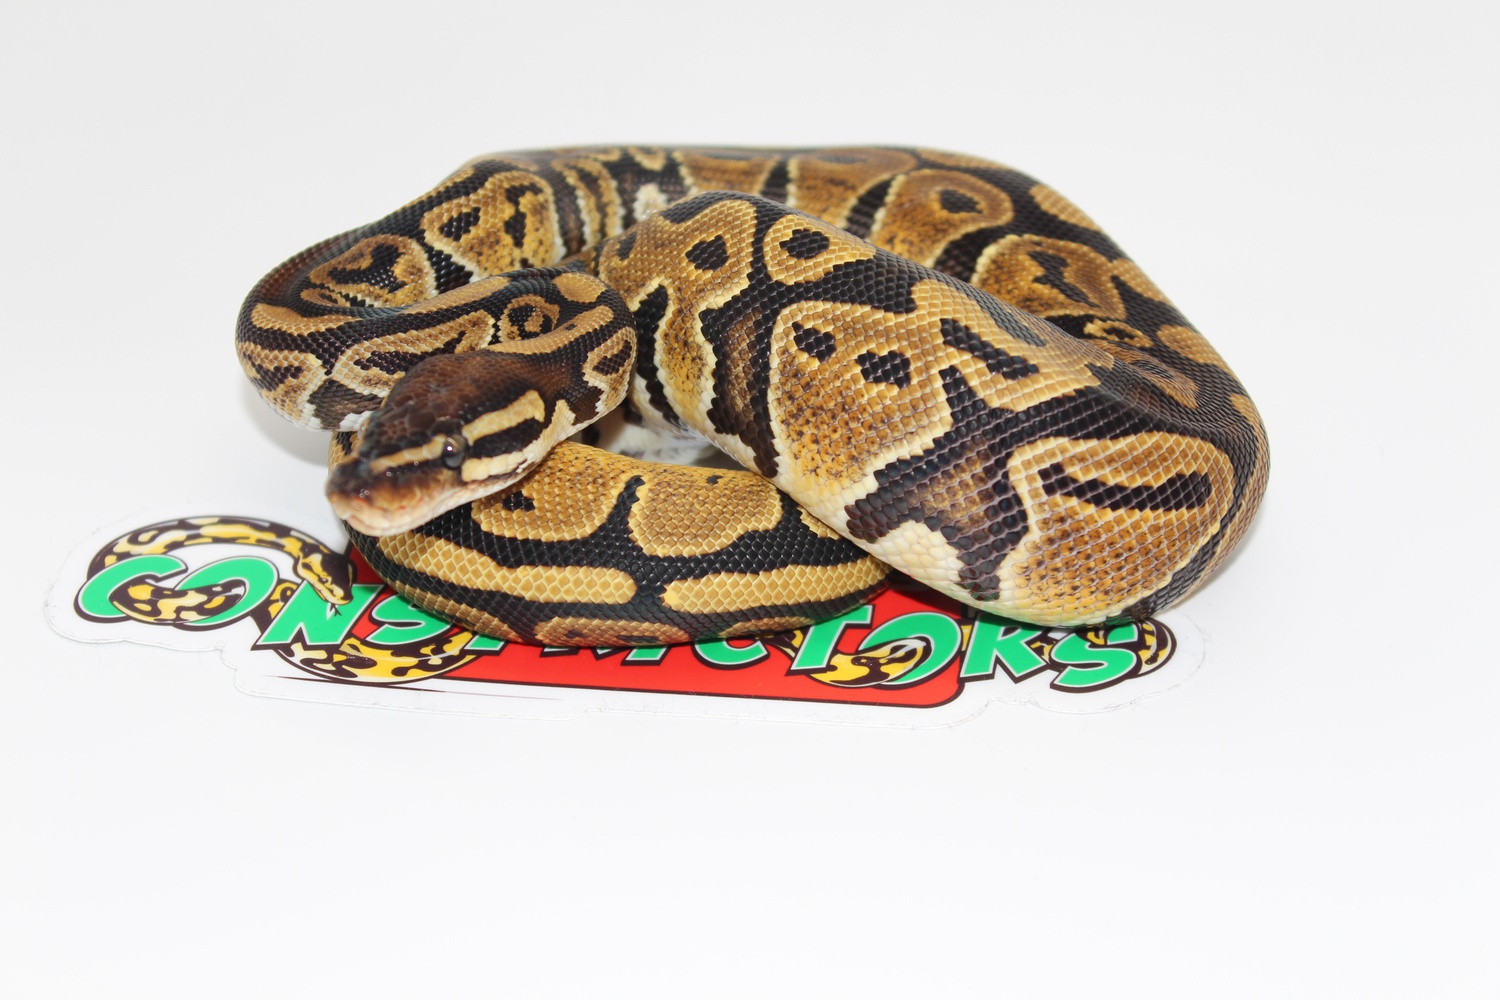 Arroyo Ball Python by Castro's Constrictors